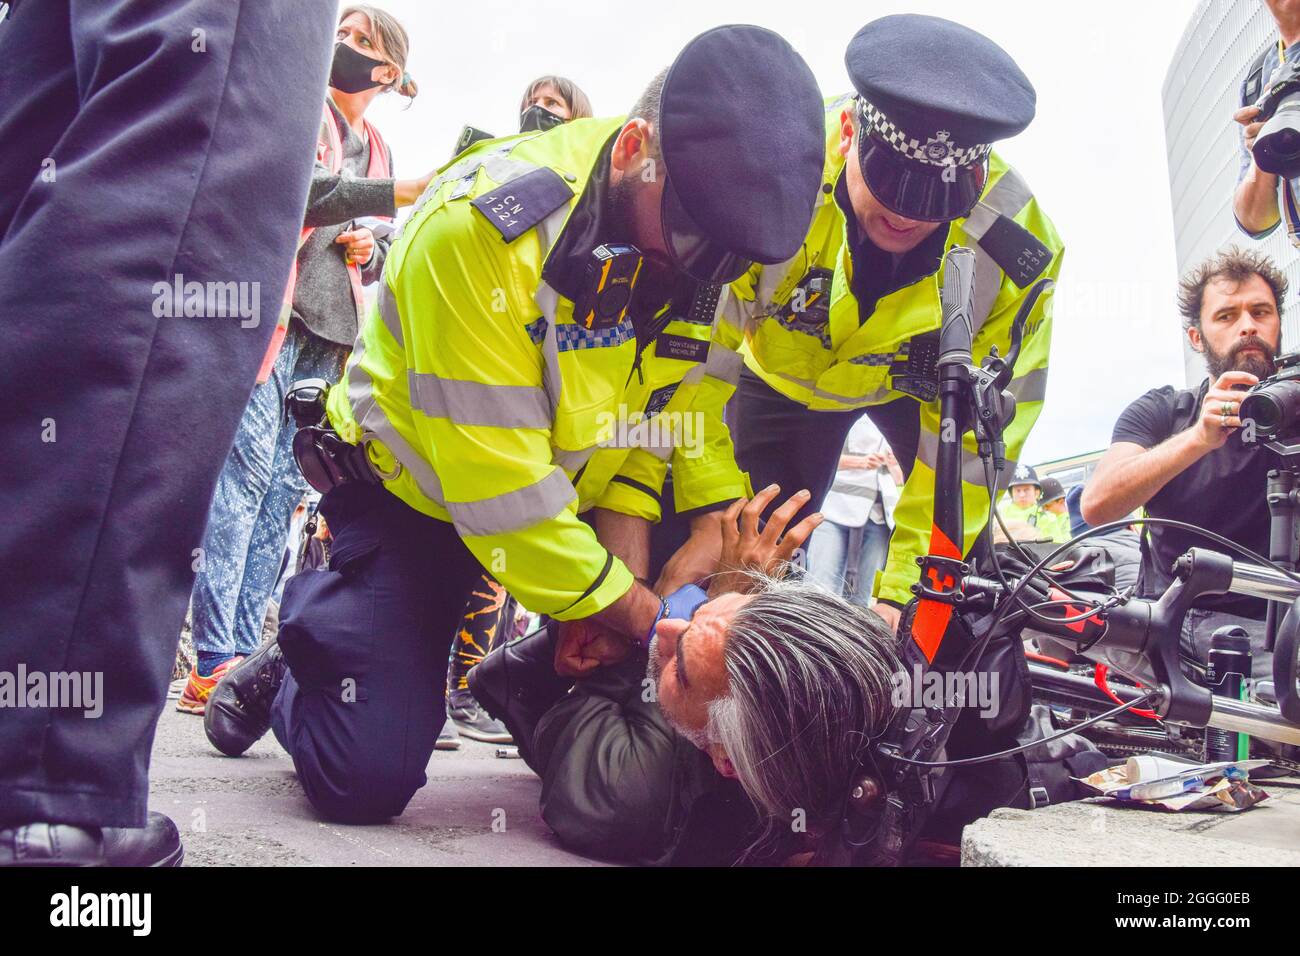 London, United Kingdom. 31st August 2021. Police officers restrain and search a protester. Extinction Rebellion protesters blocked the streets next to London Bridge with a bus, as part of their two-week Impossible Rebellion campaign. (Credit: Vuk Valcic / Alamy Live News) Stock Photo